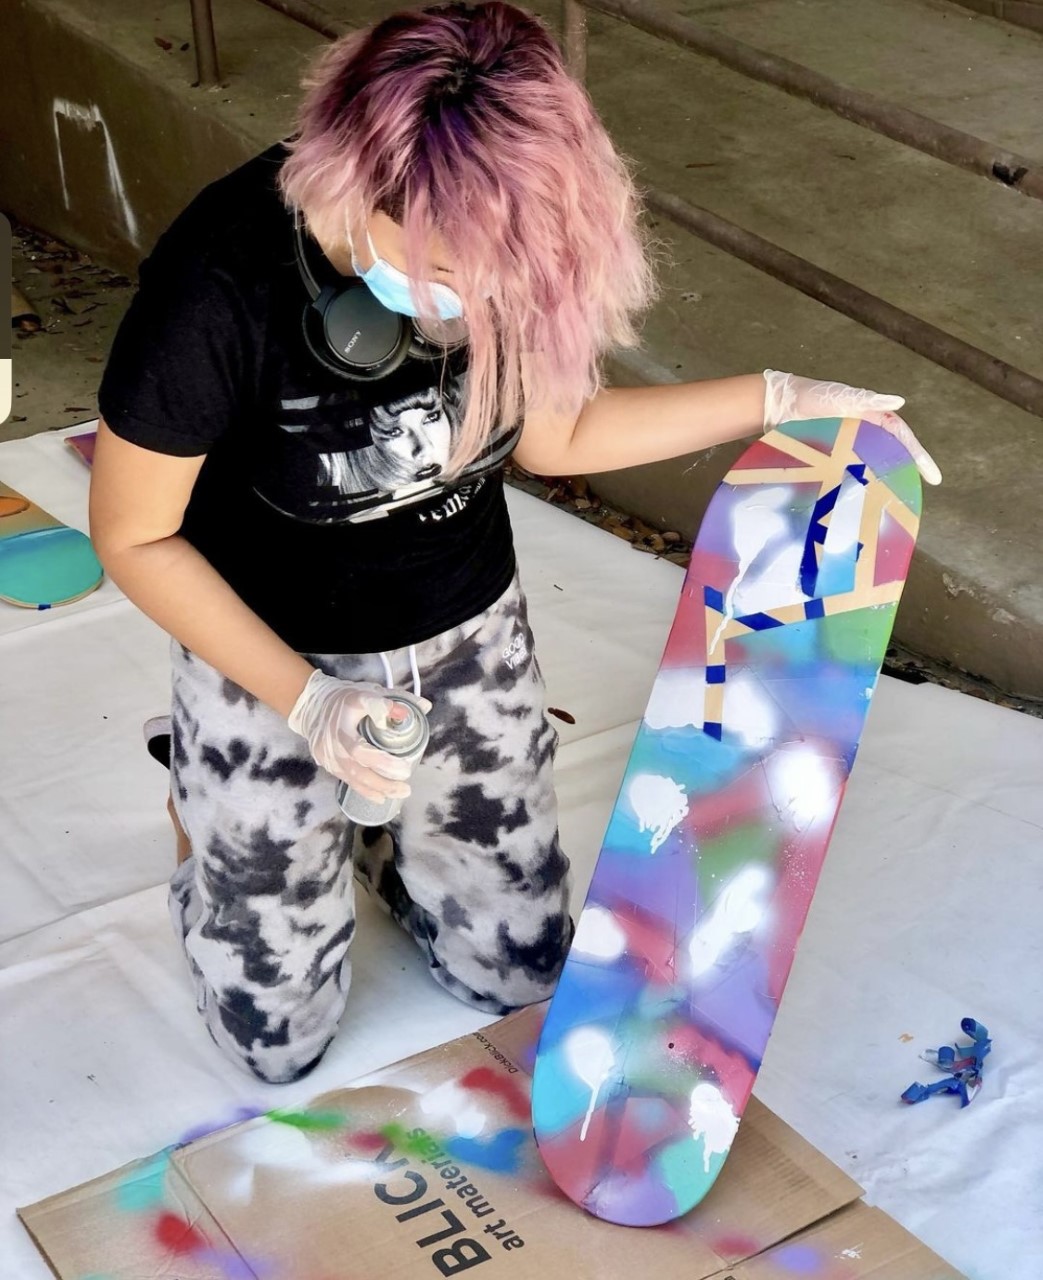 Class Image Street Art: Skate Decks, Stenciling, and More! Ages 10-14